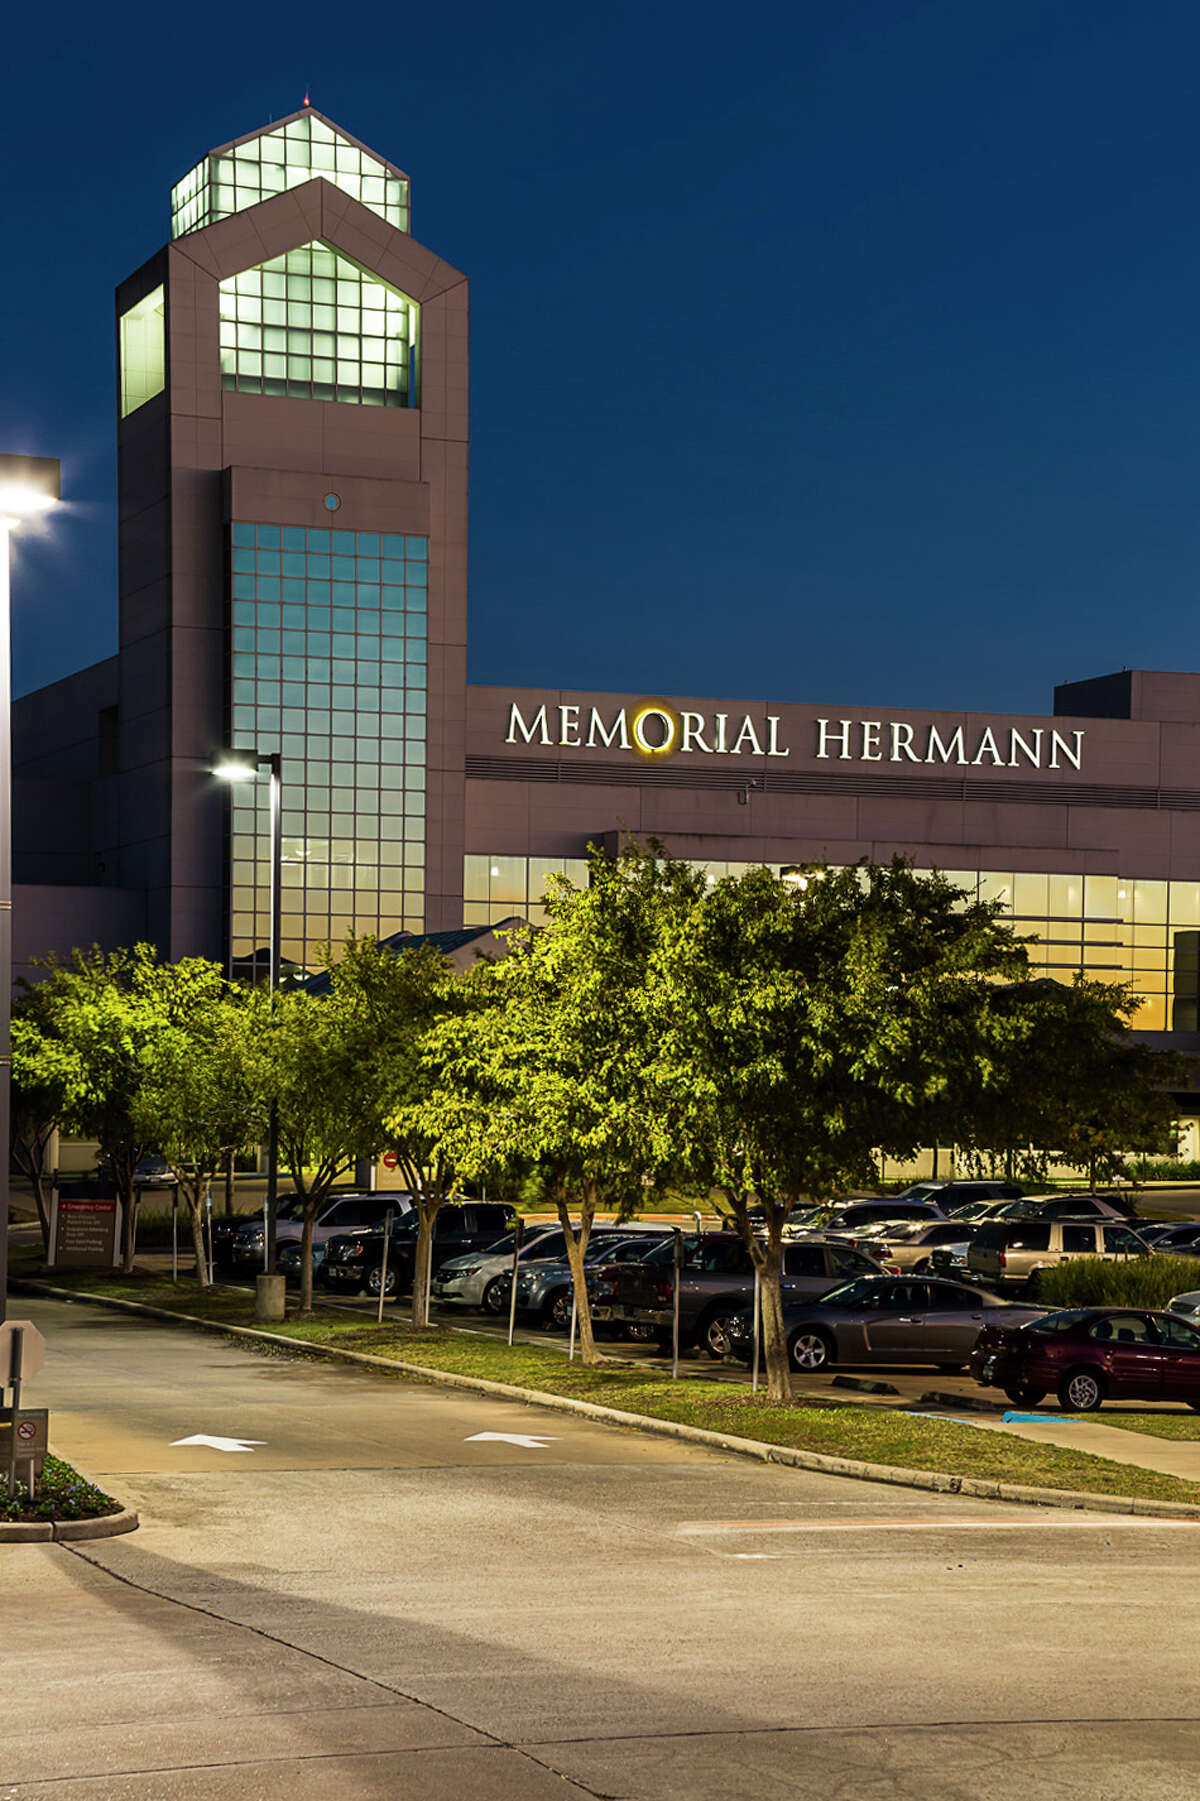 Memorial Hermann Southeast Hospital has launched a cardiac surgery program, expanded cancer treatment services, renovated its facilities and augmented its team of specialists.